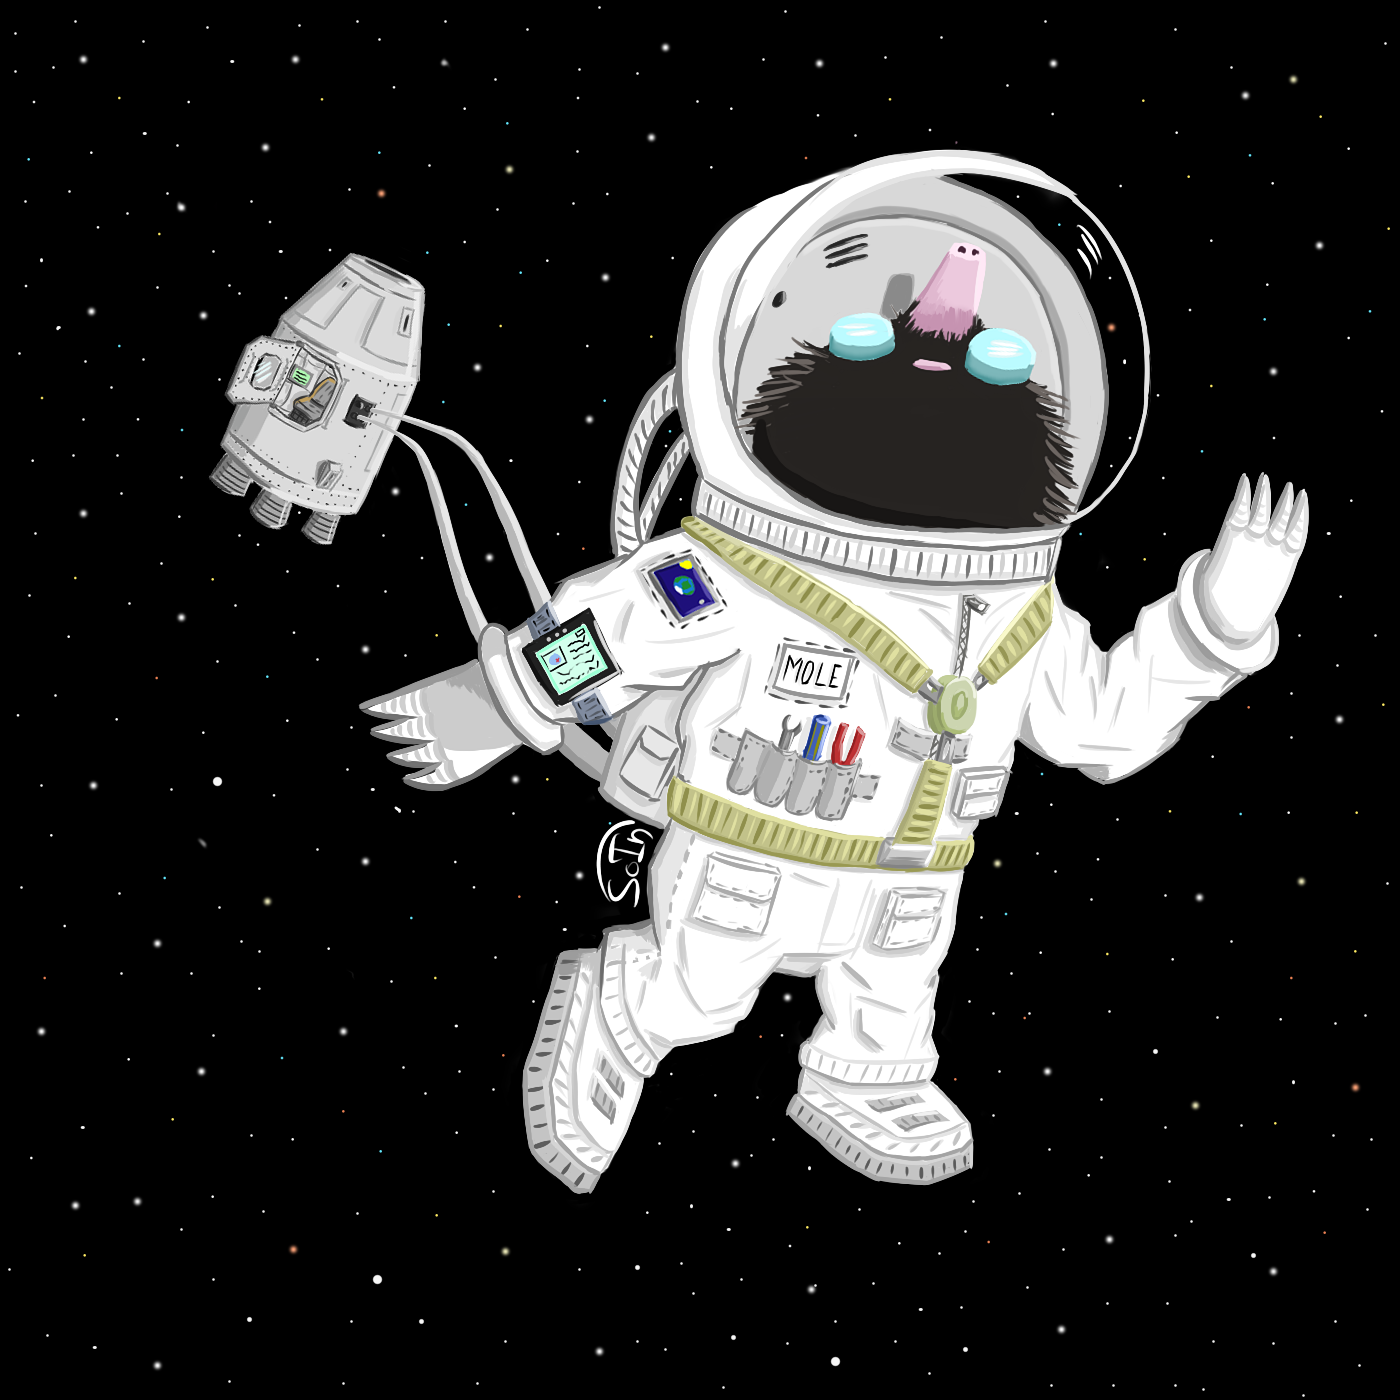 Mole Astronaut - My, Painting, Tablet, Graphics, Drawing, Space, Astronaut, Mole